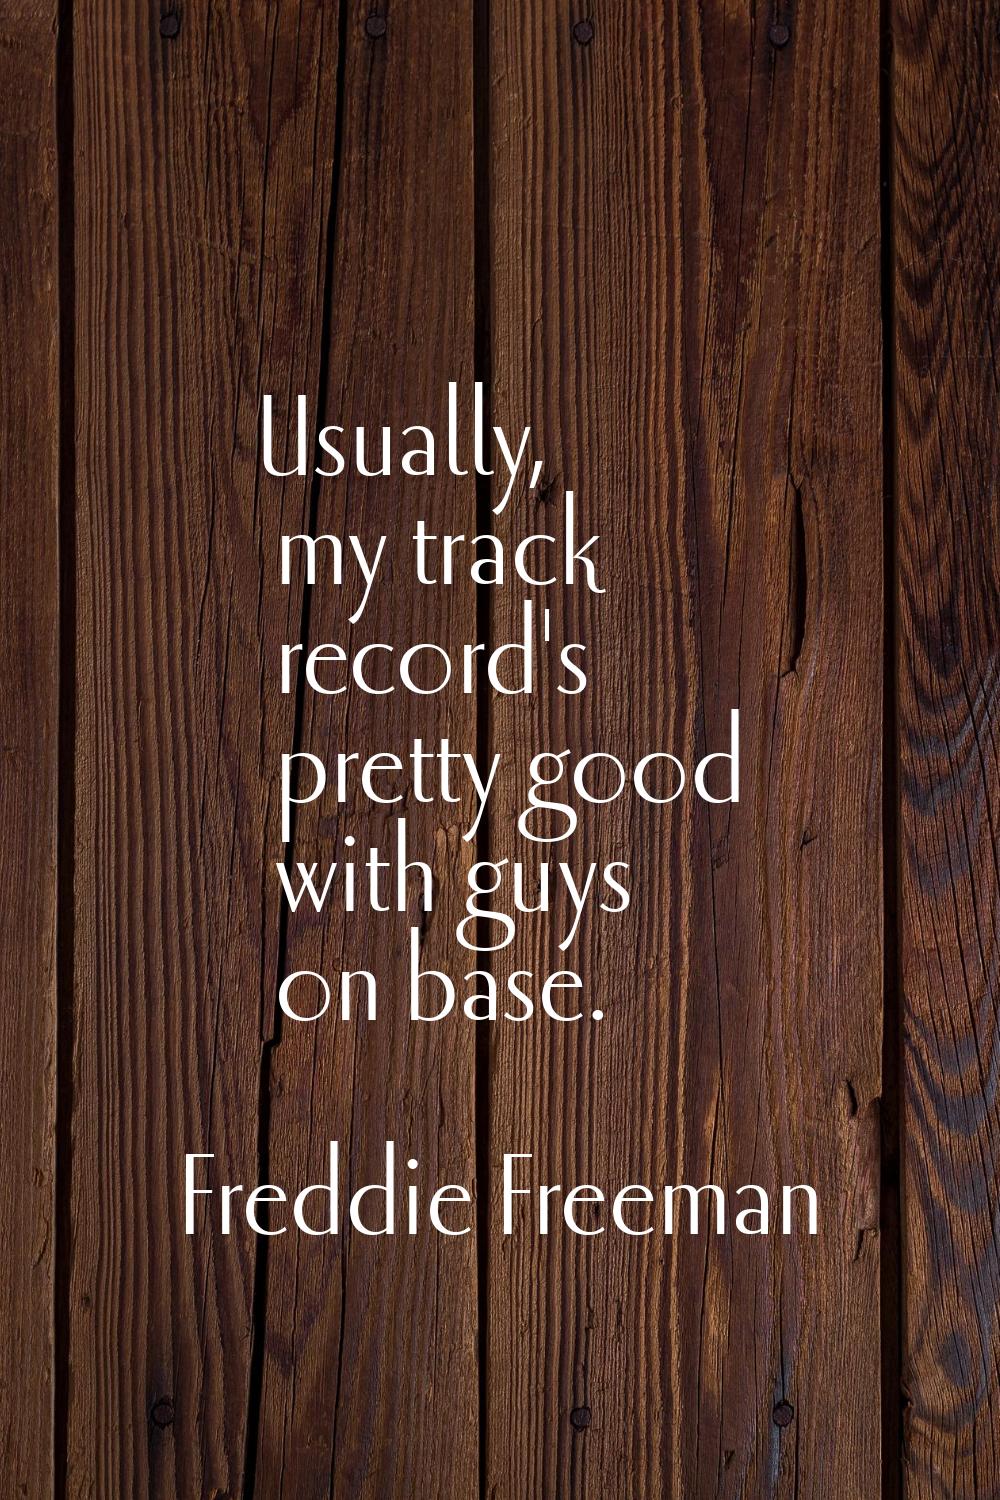 Usually, my track record's pretty good with guys on base.